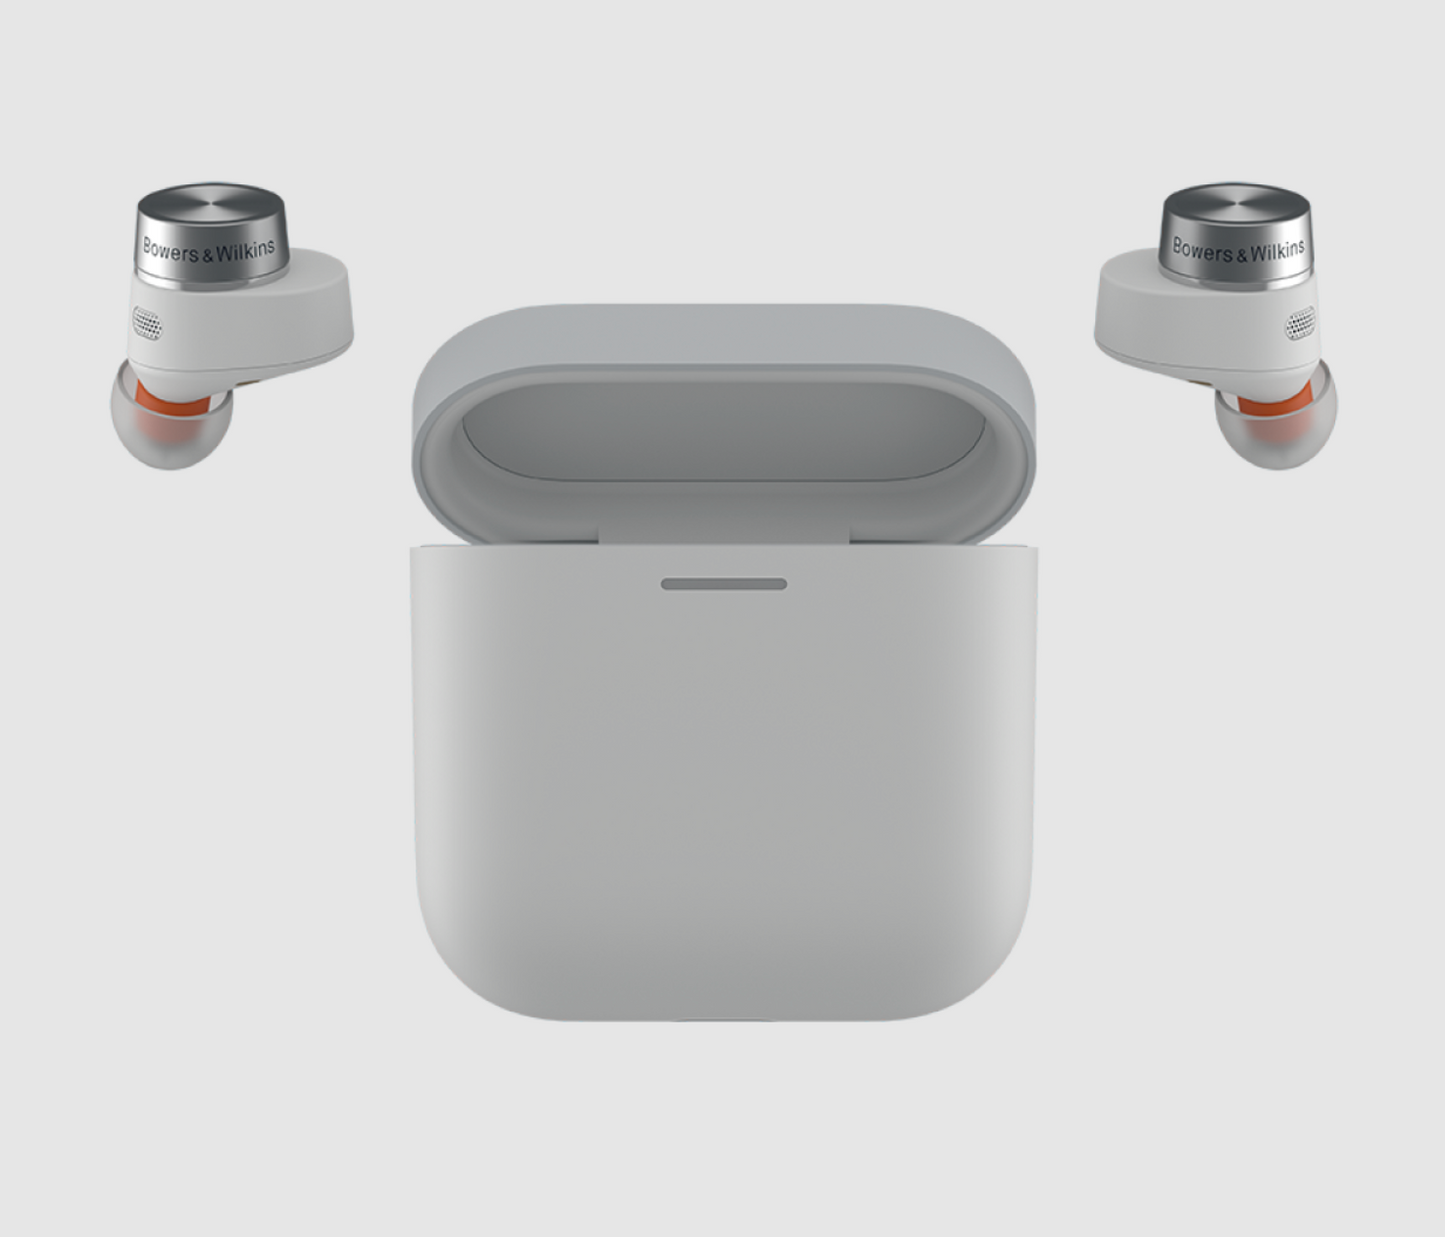 B&W Pi5 S2 Wireless Earbuds in Could Gray. Image with case